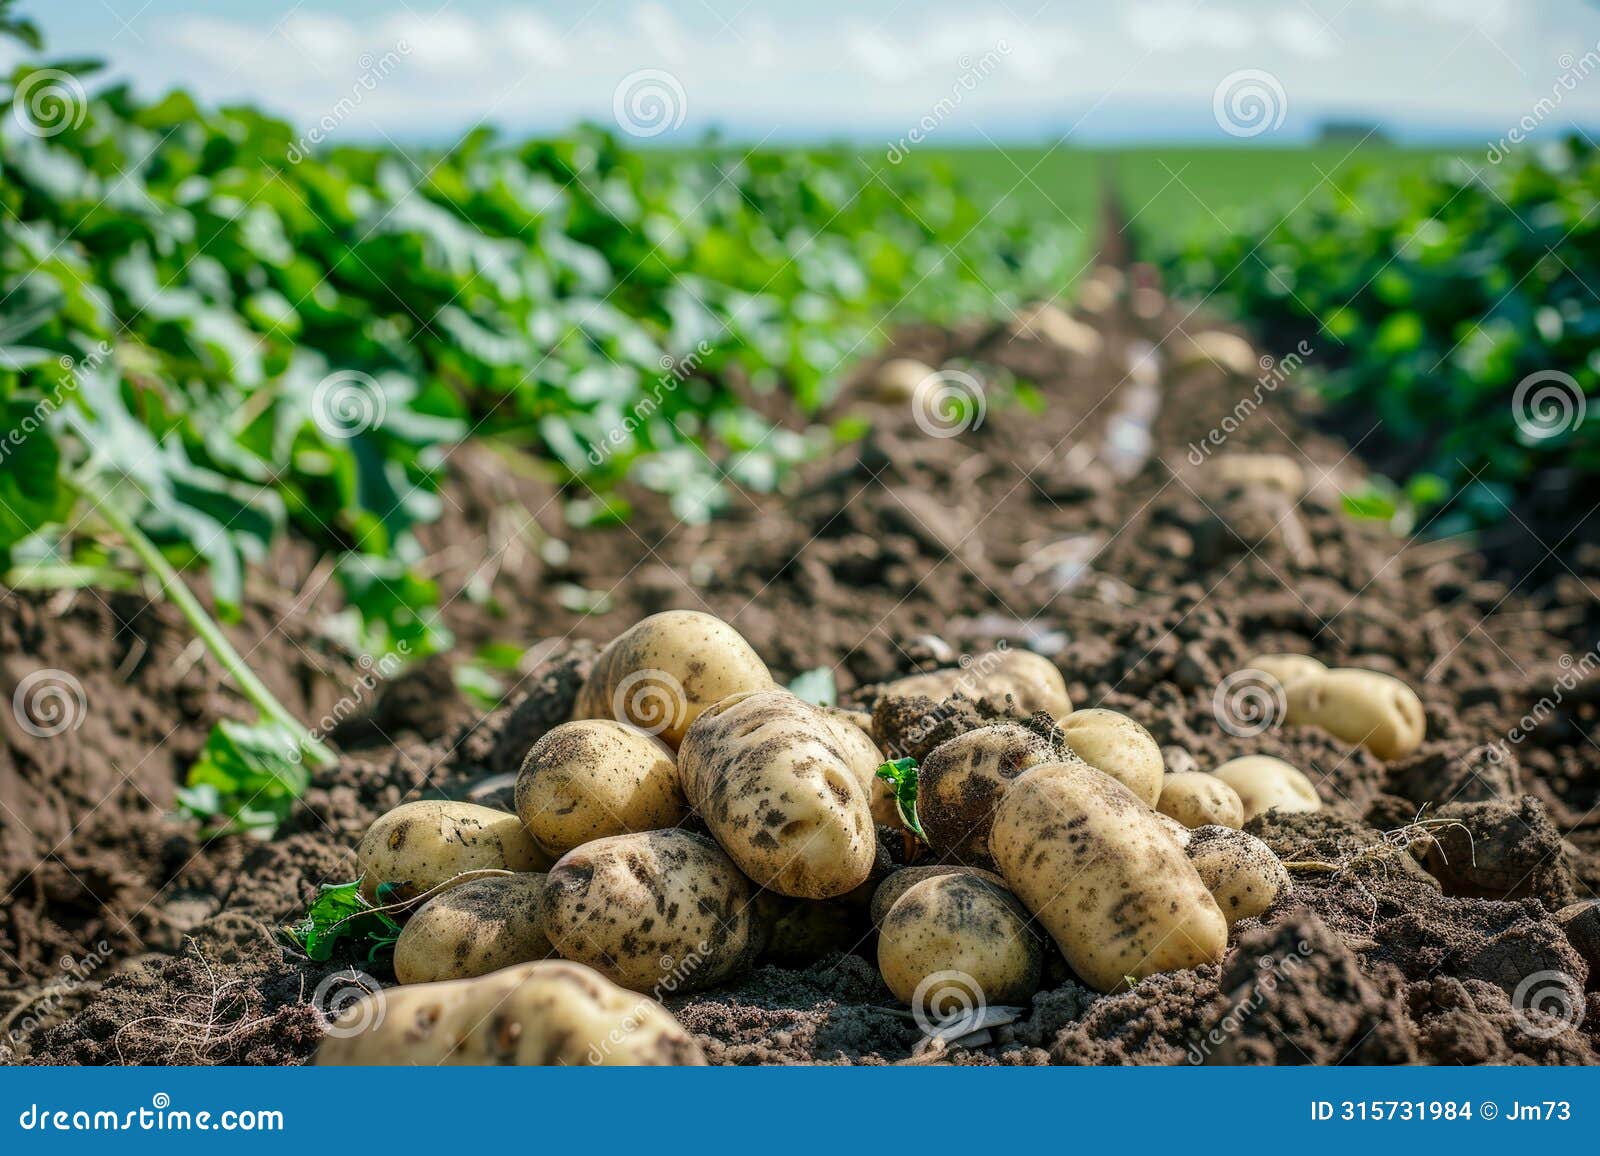 freshly harvested potatoes in a field